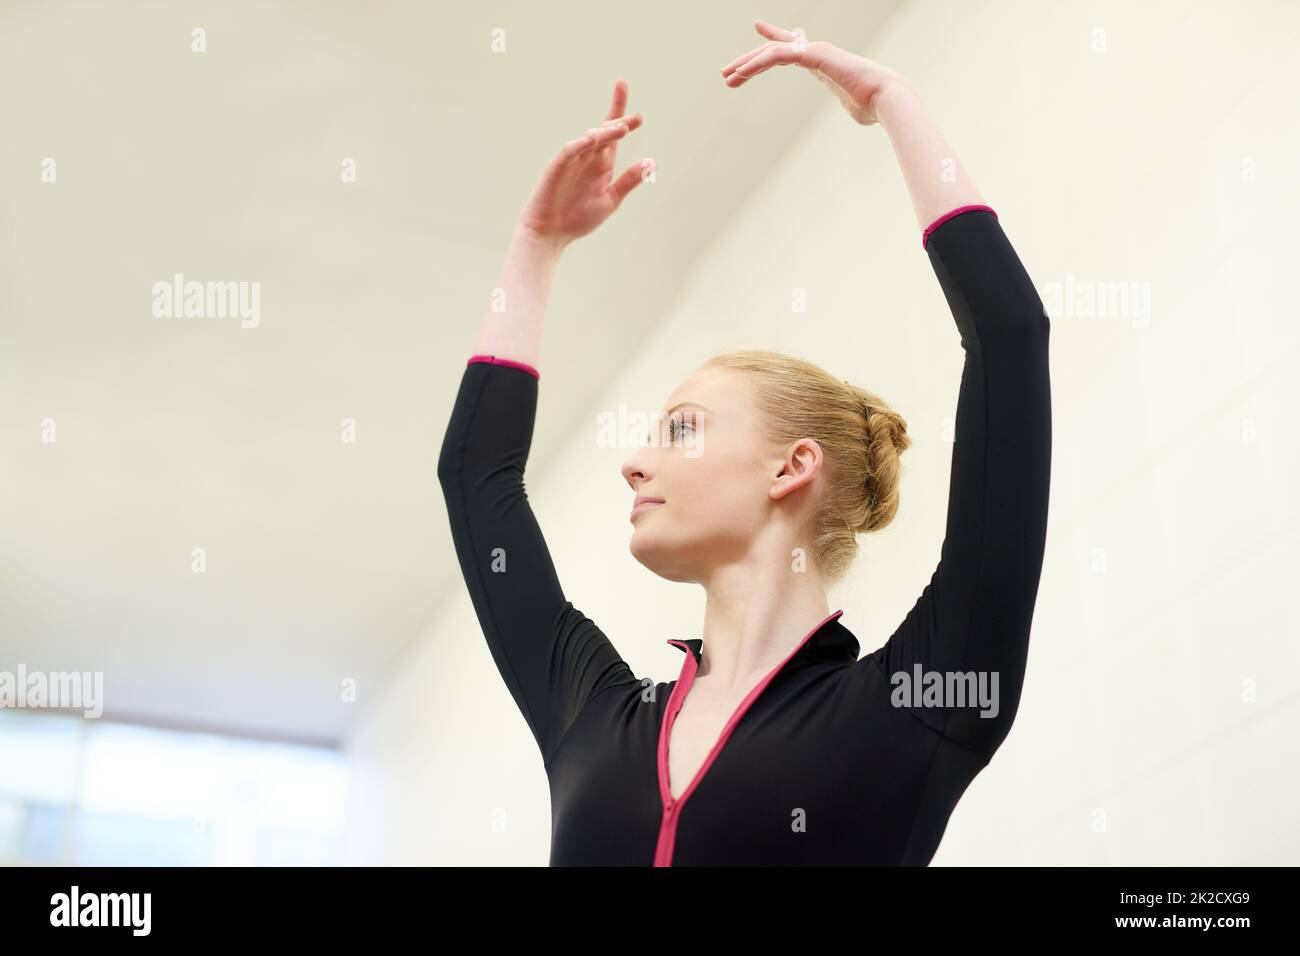 Her fifth position is flawless. Shot of a young woman practising ballet. Stock Photo